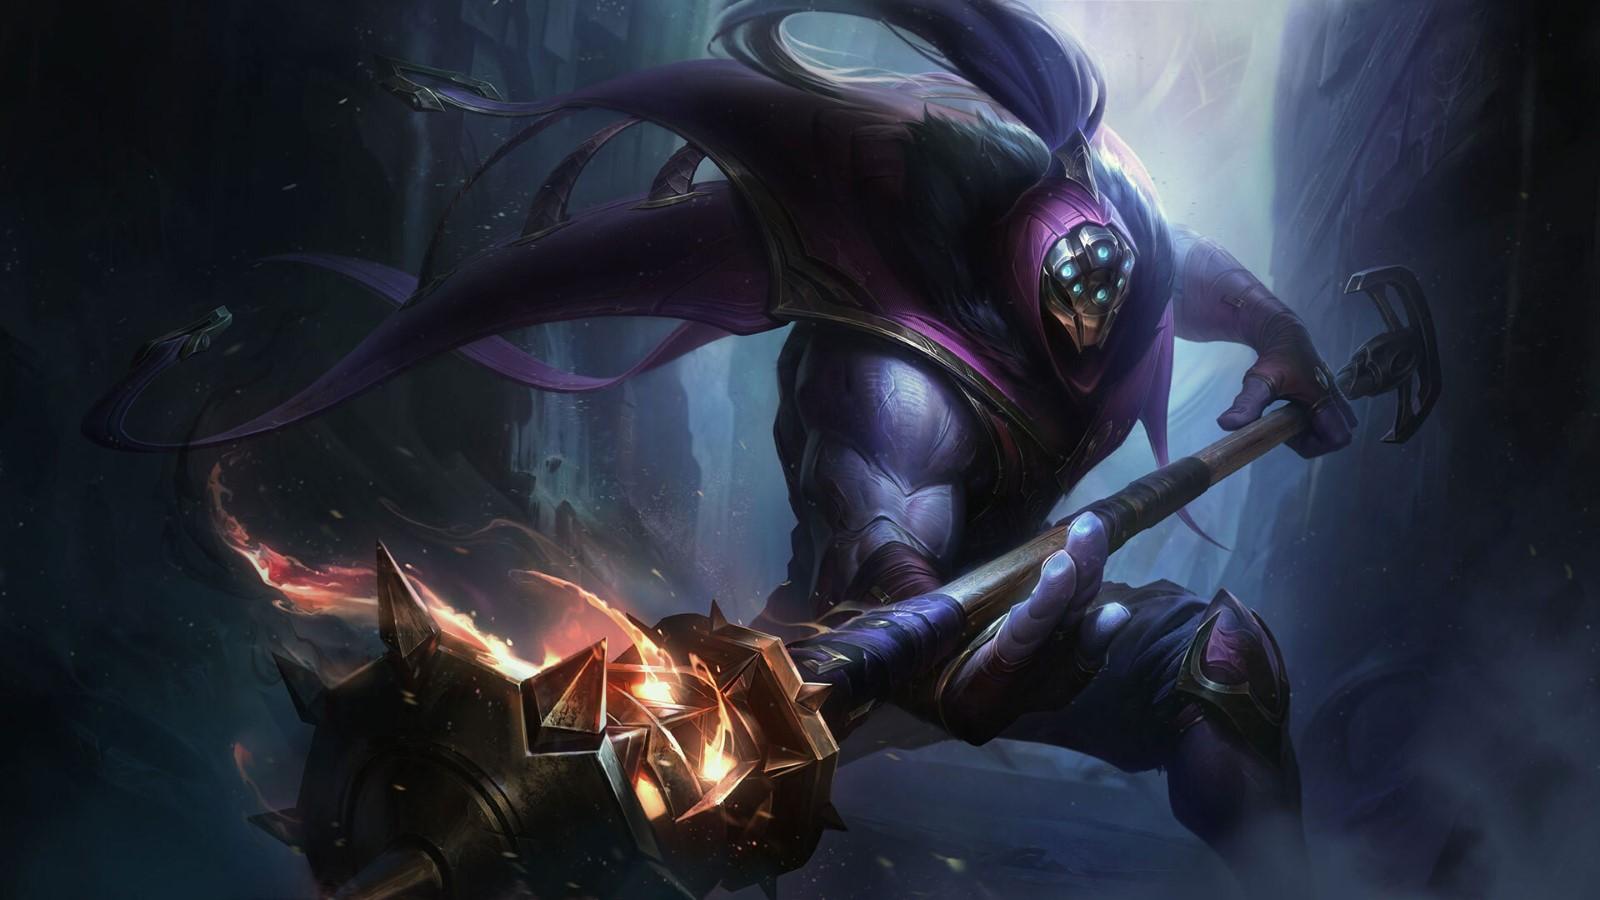 League of Legends Dev Team on X: Phroxzon is out this week, so we